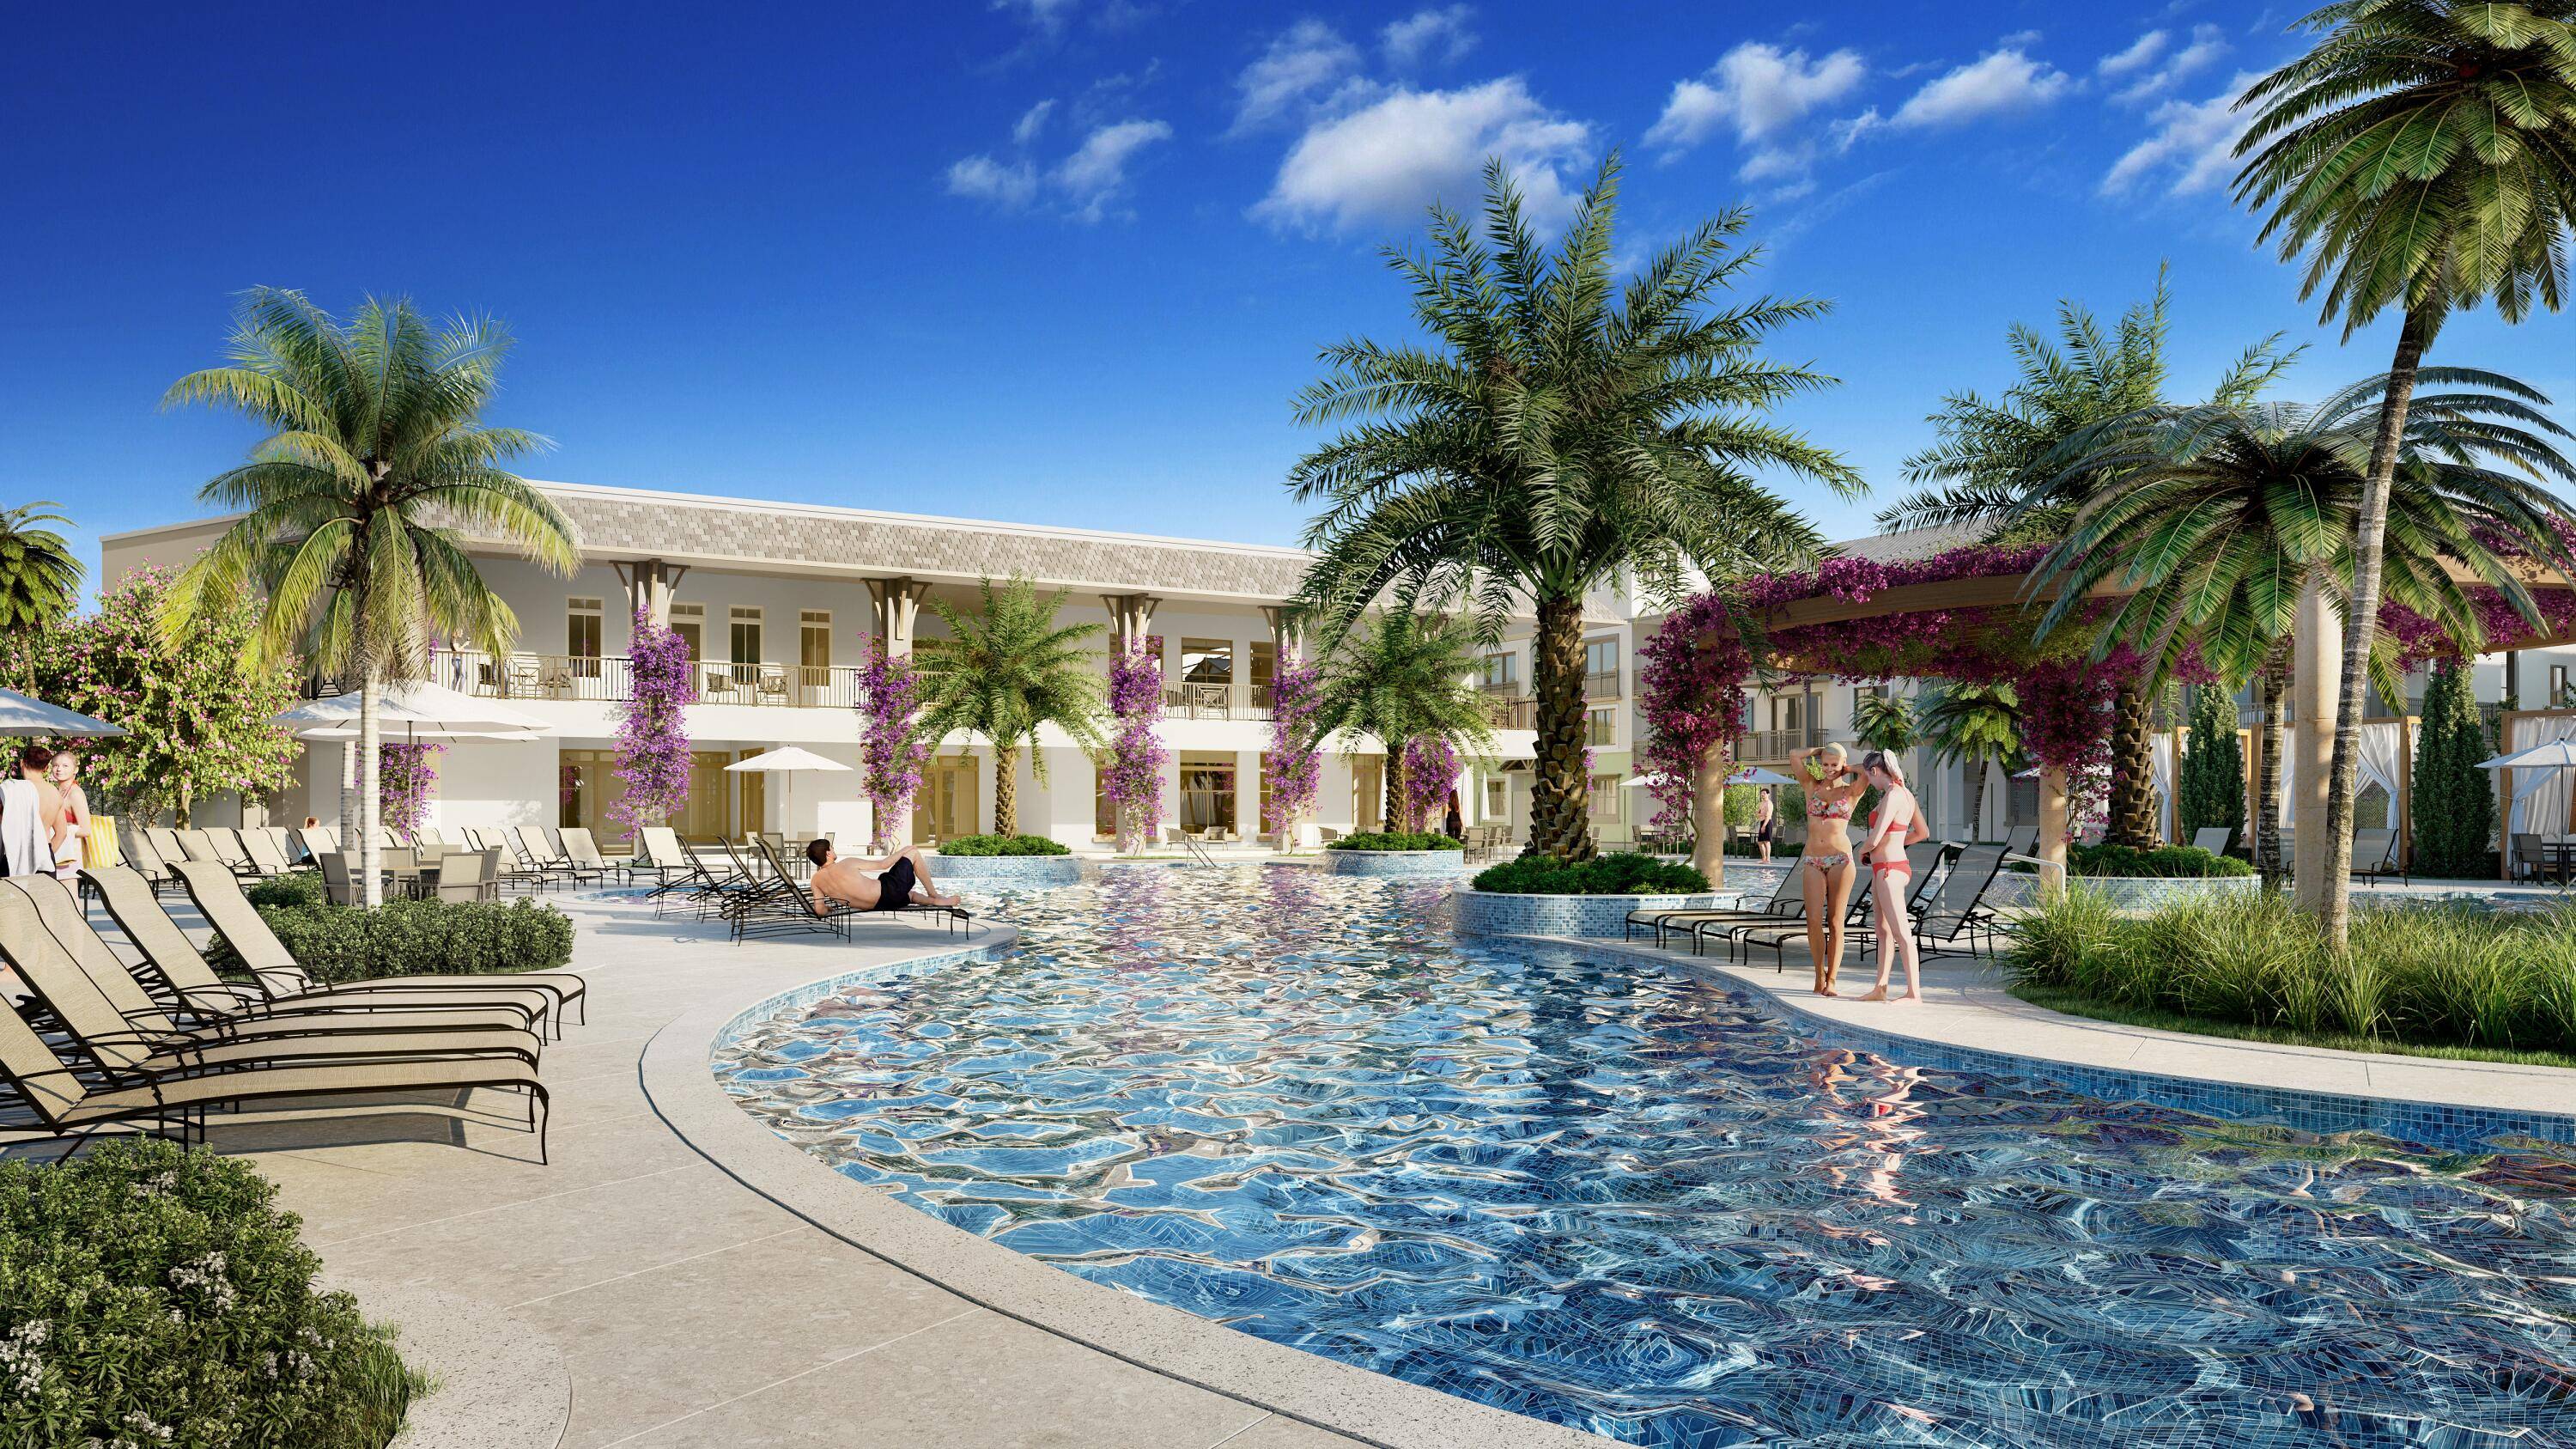 Welcome to grand resort style living, featuring beautiful residences, a massive pool deck with 7, 000 square foot pool, a magnificent two story clubhouse.